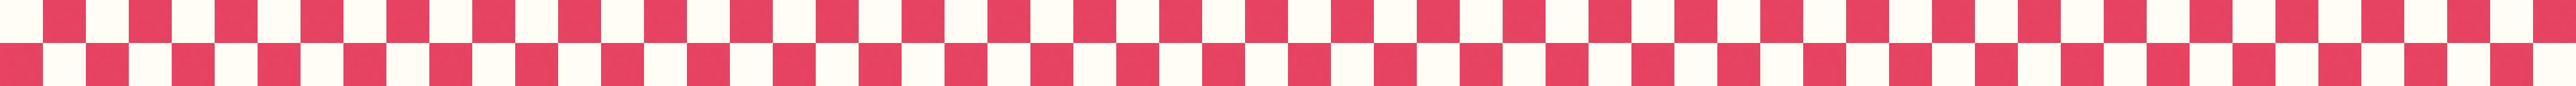 Alternating pink and clear squares for vibes.